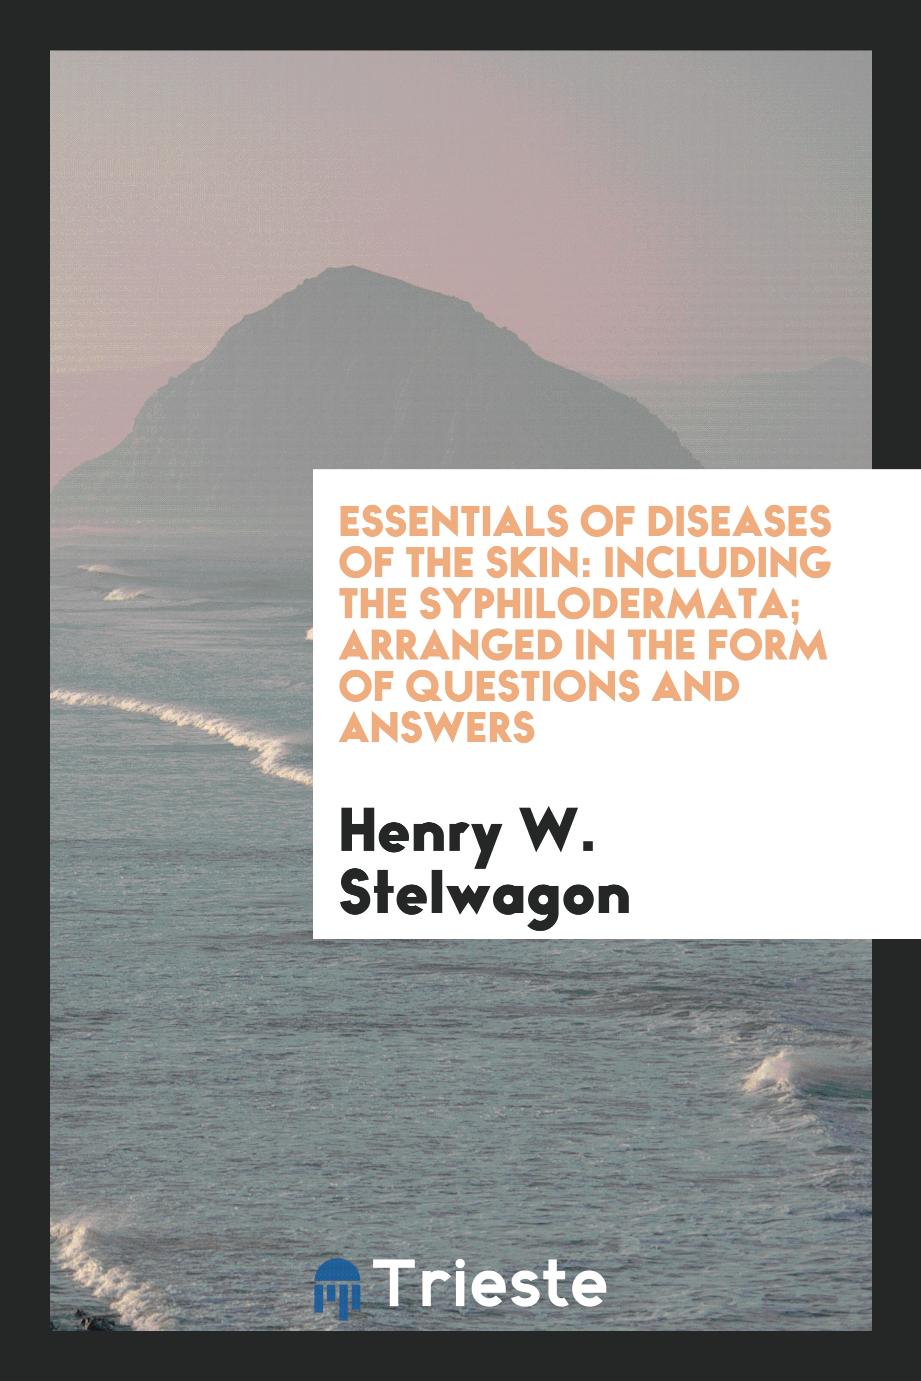 Essentials of diseases of the skin: including the syphilodermata; Arranged in the form of questions and answers